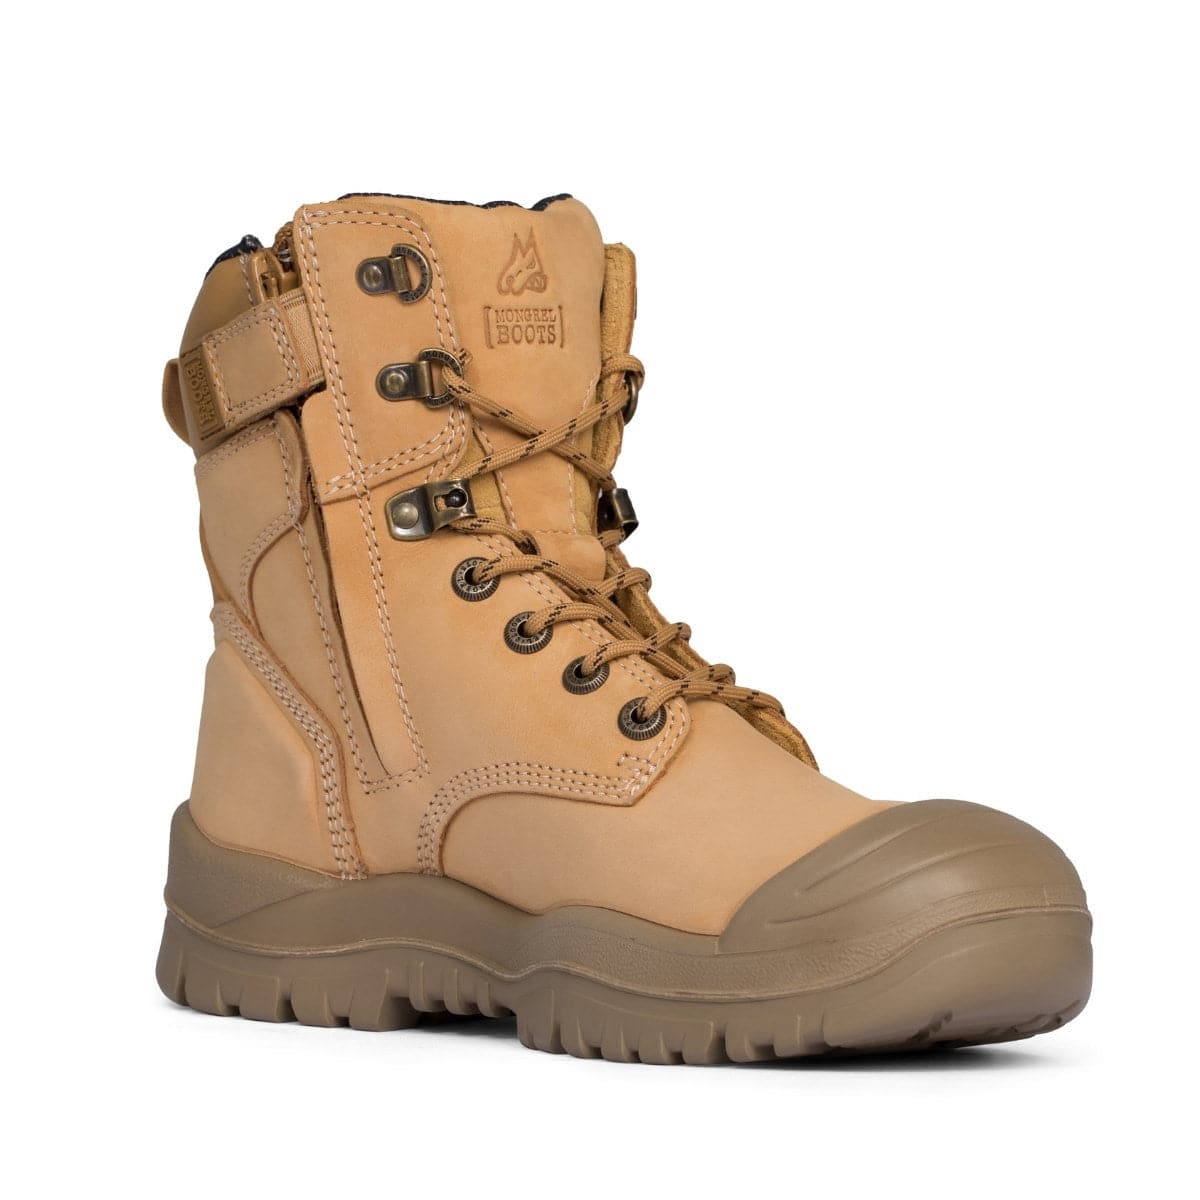 Mongrel Wheat High Ankle ZipSider Safety Boot 561050